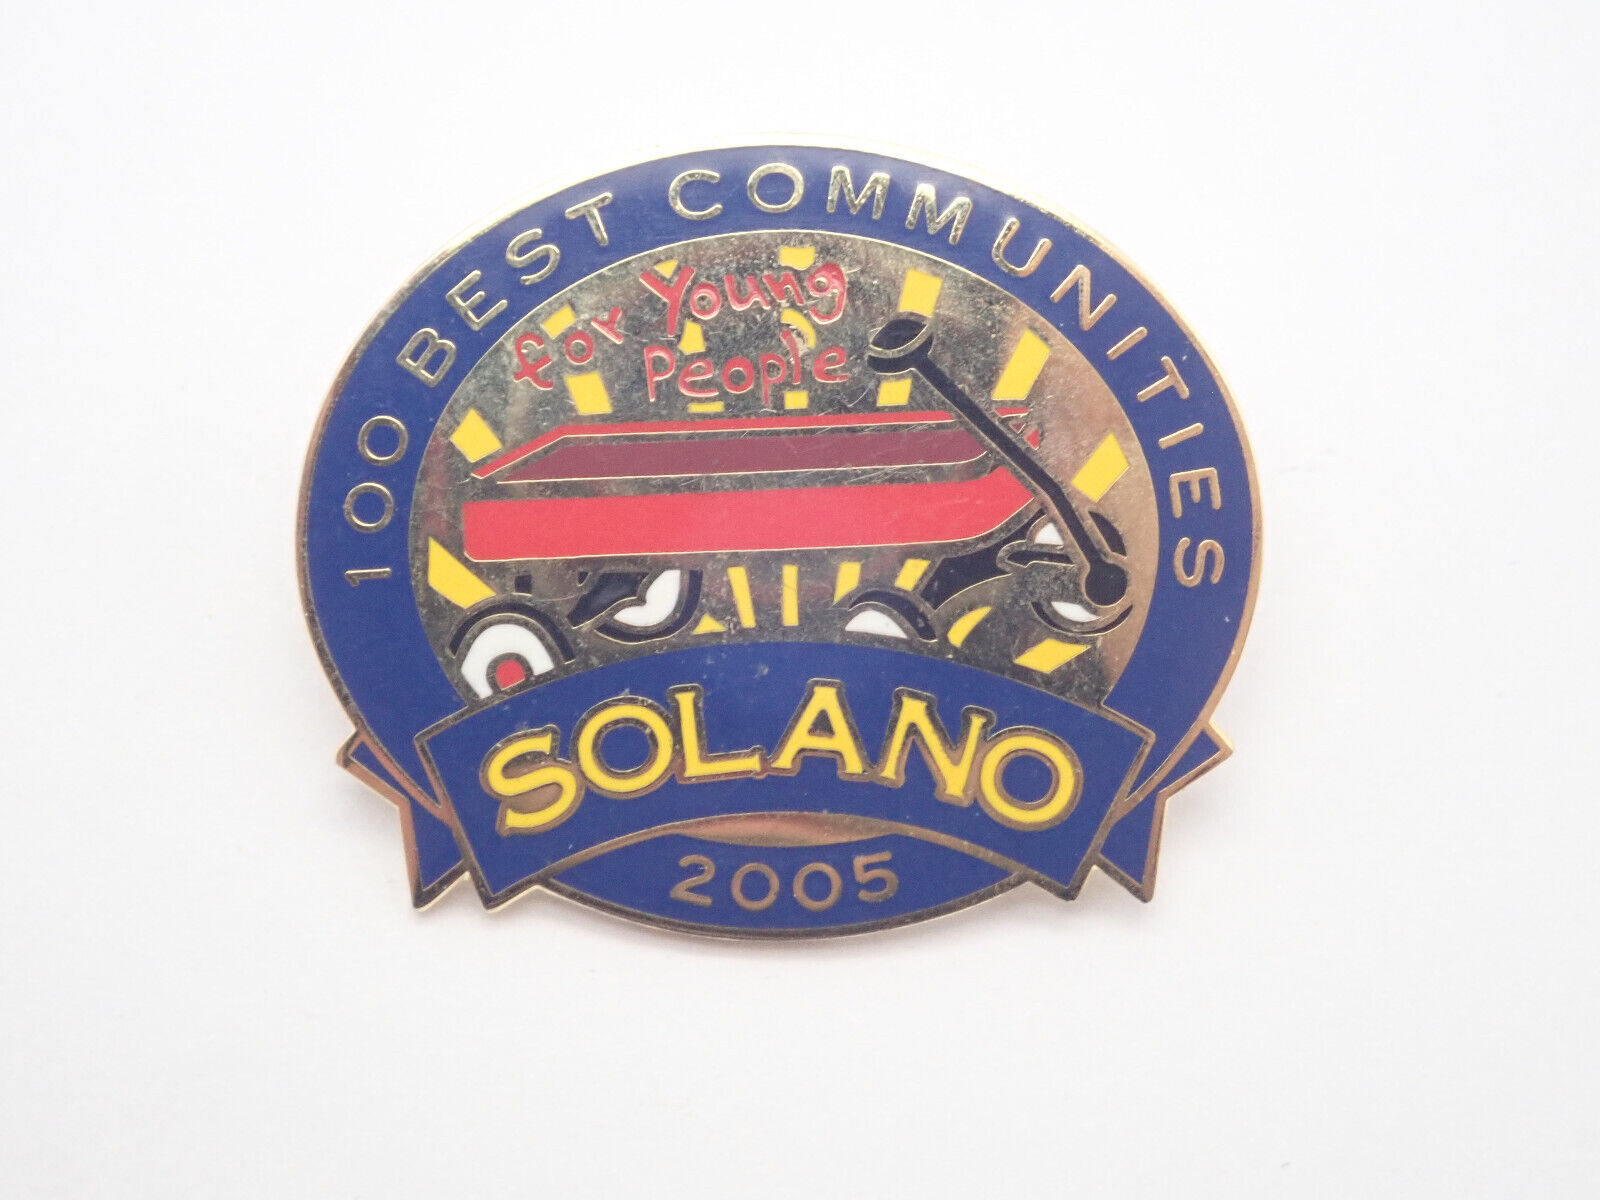 100 Best Communities for Young People Solano Vintage Lapel Pin